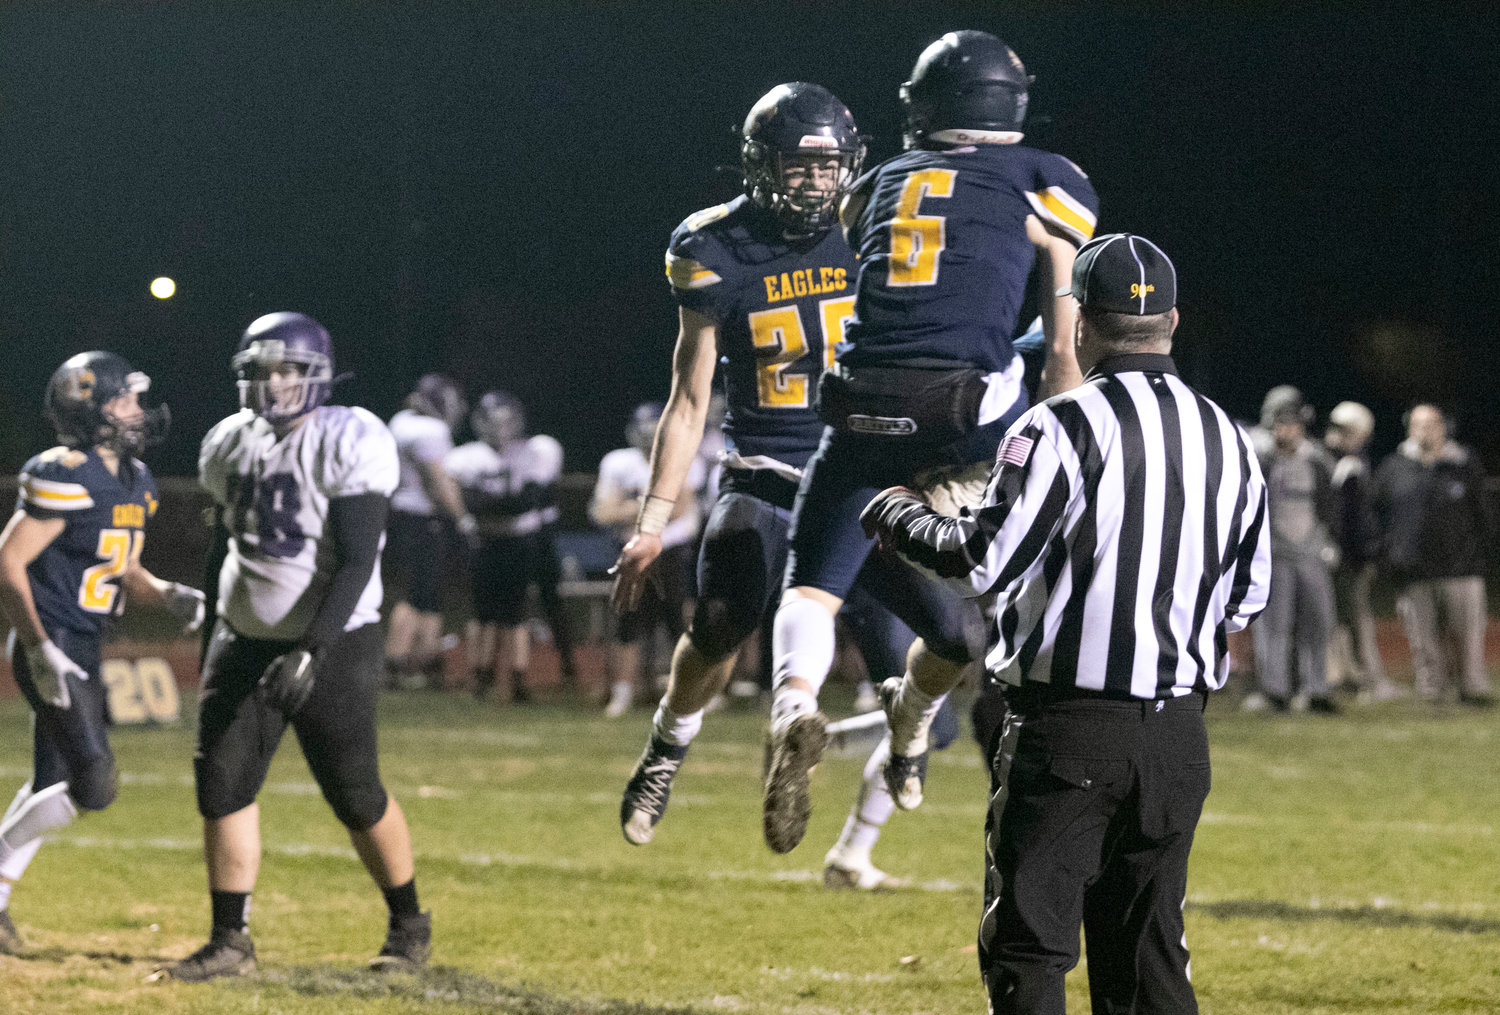 Bryan Ivatts (left) celebrates with a teammate after scoring a touch down in the first half.